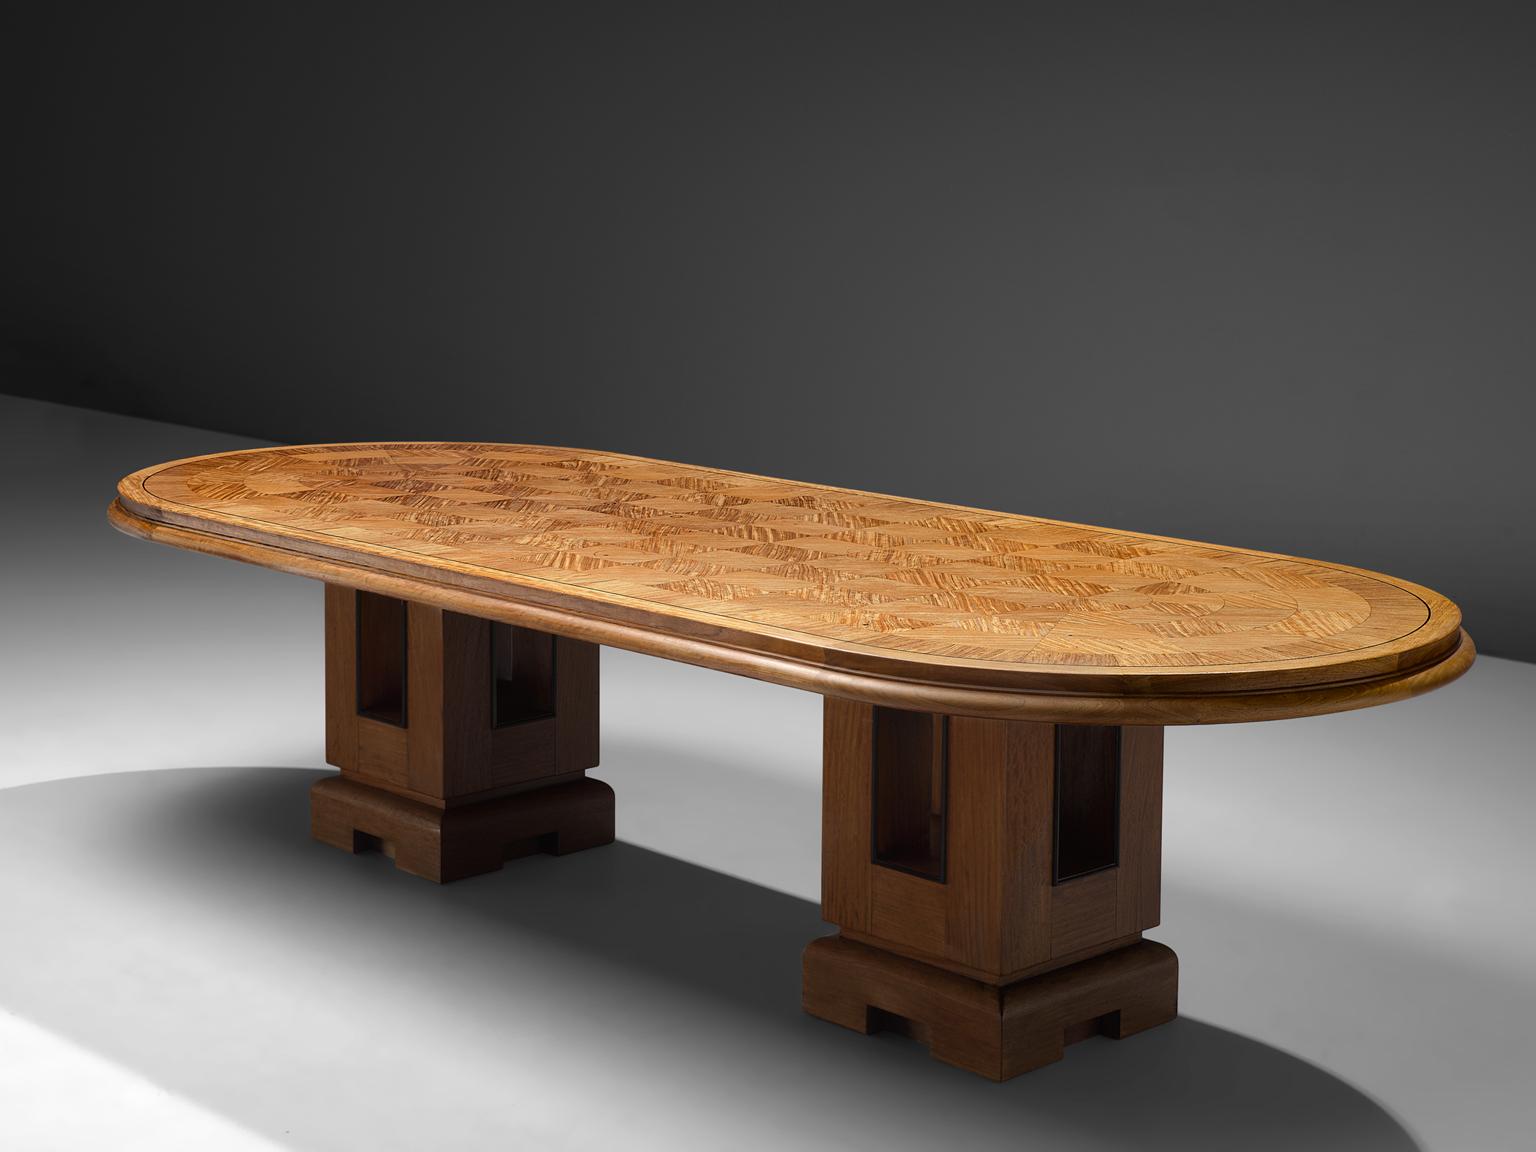 Alfred Chambon, 3 meter dining- or conference table in oak, France, 1930s. 

This custom made large Art Deco table is made by Alfred Chambon. It has been executed with a very detailed wooden inlay on top. It shows great craftsmanship, as can be seen